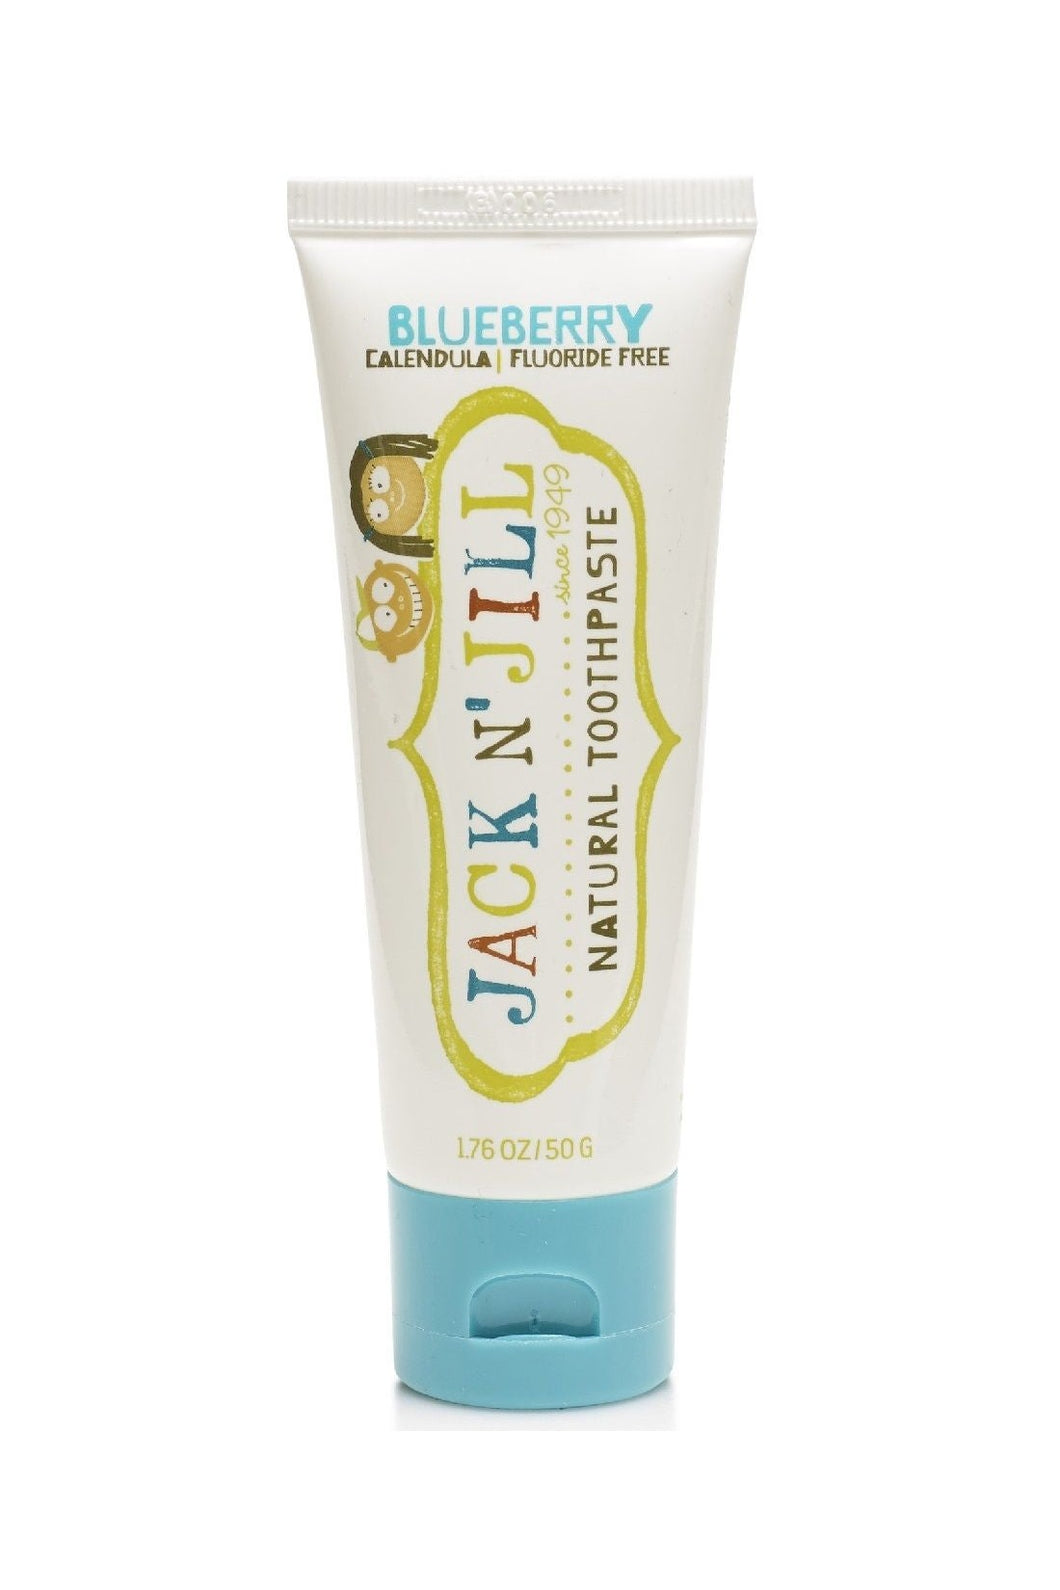 Jack N Jill Natural Calendula Toothpaste Blueberry Flavour 1